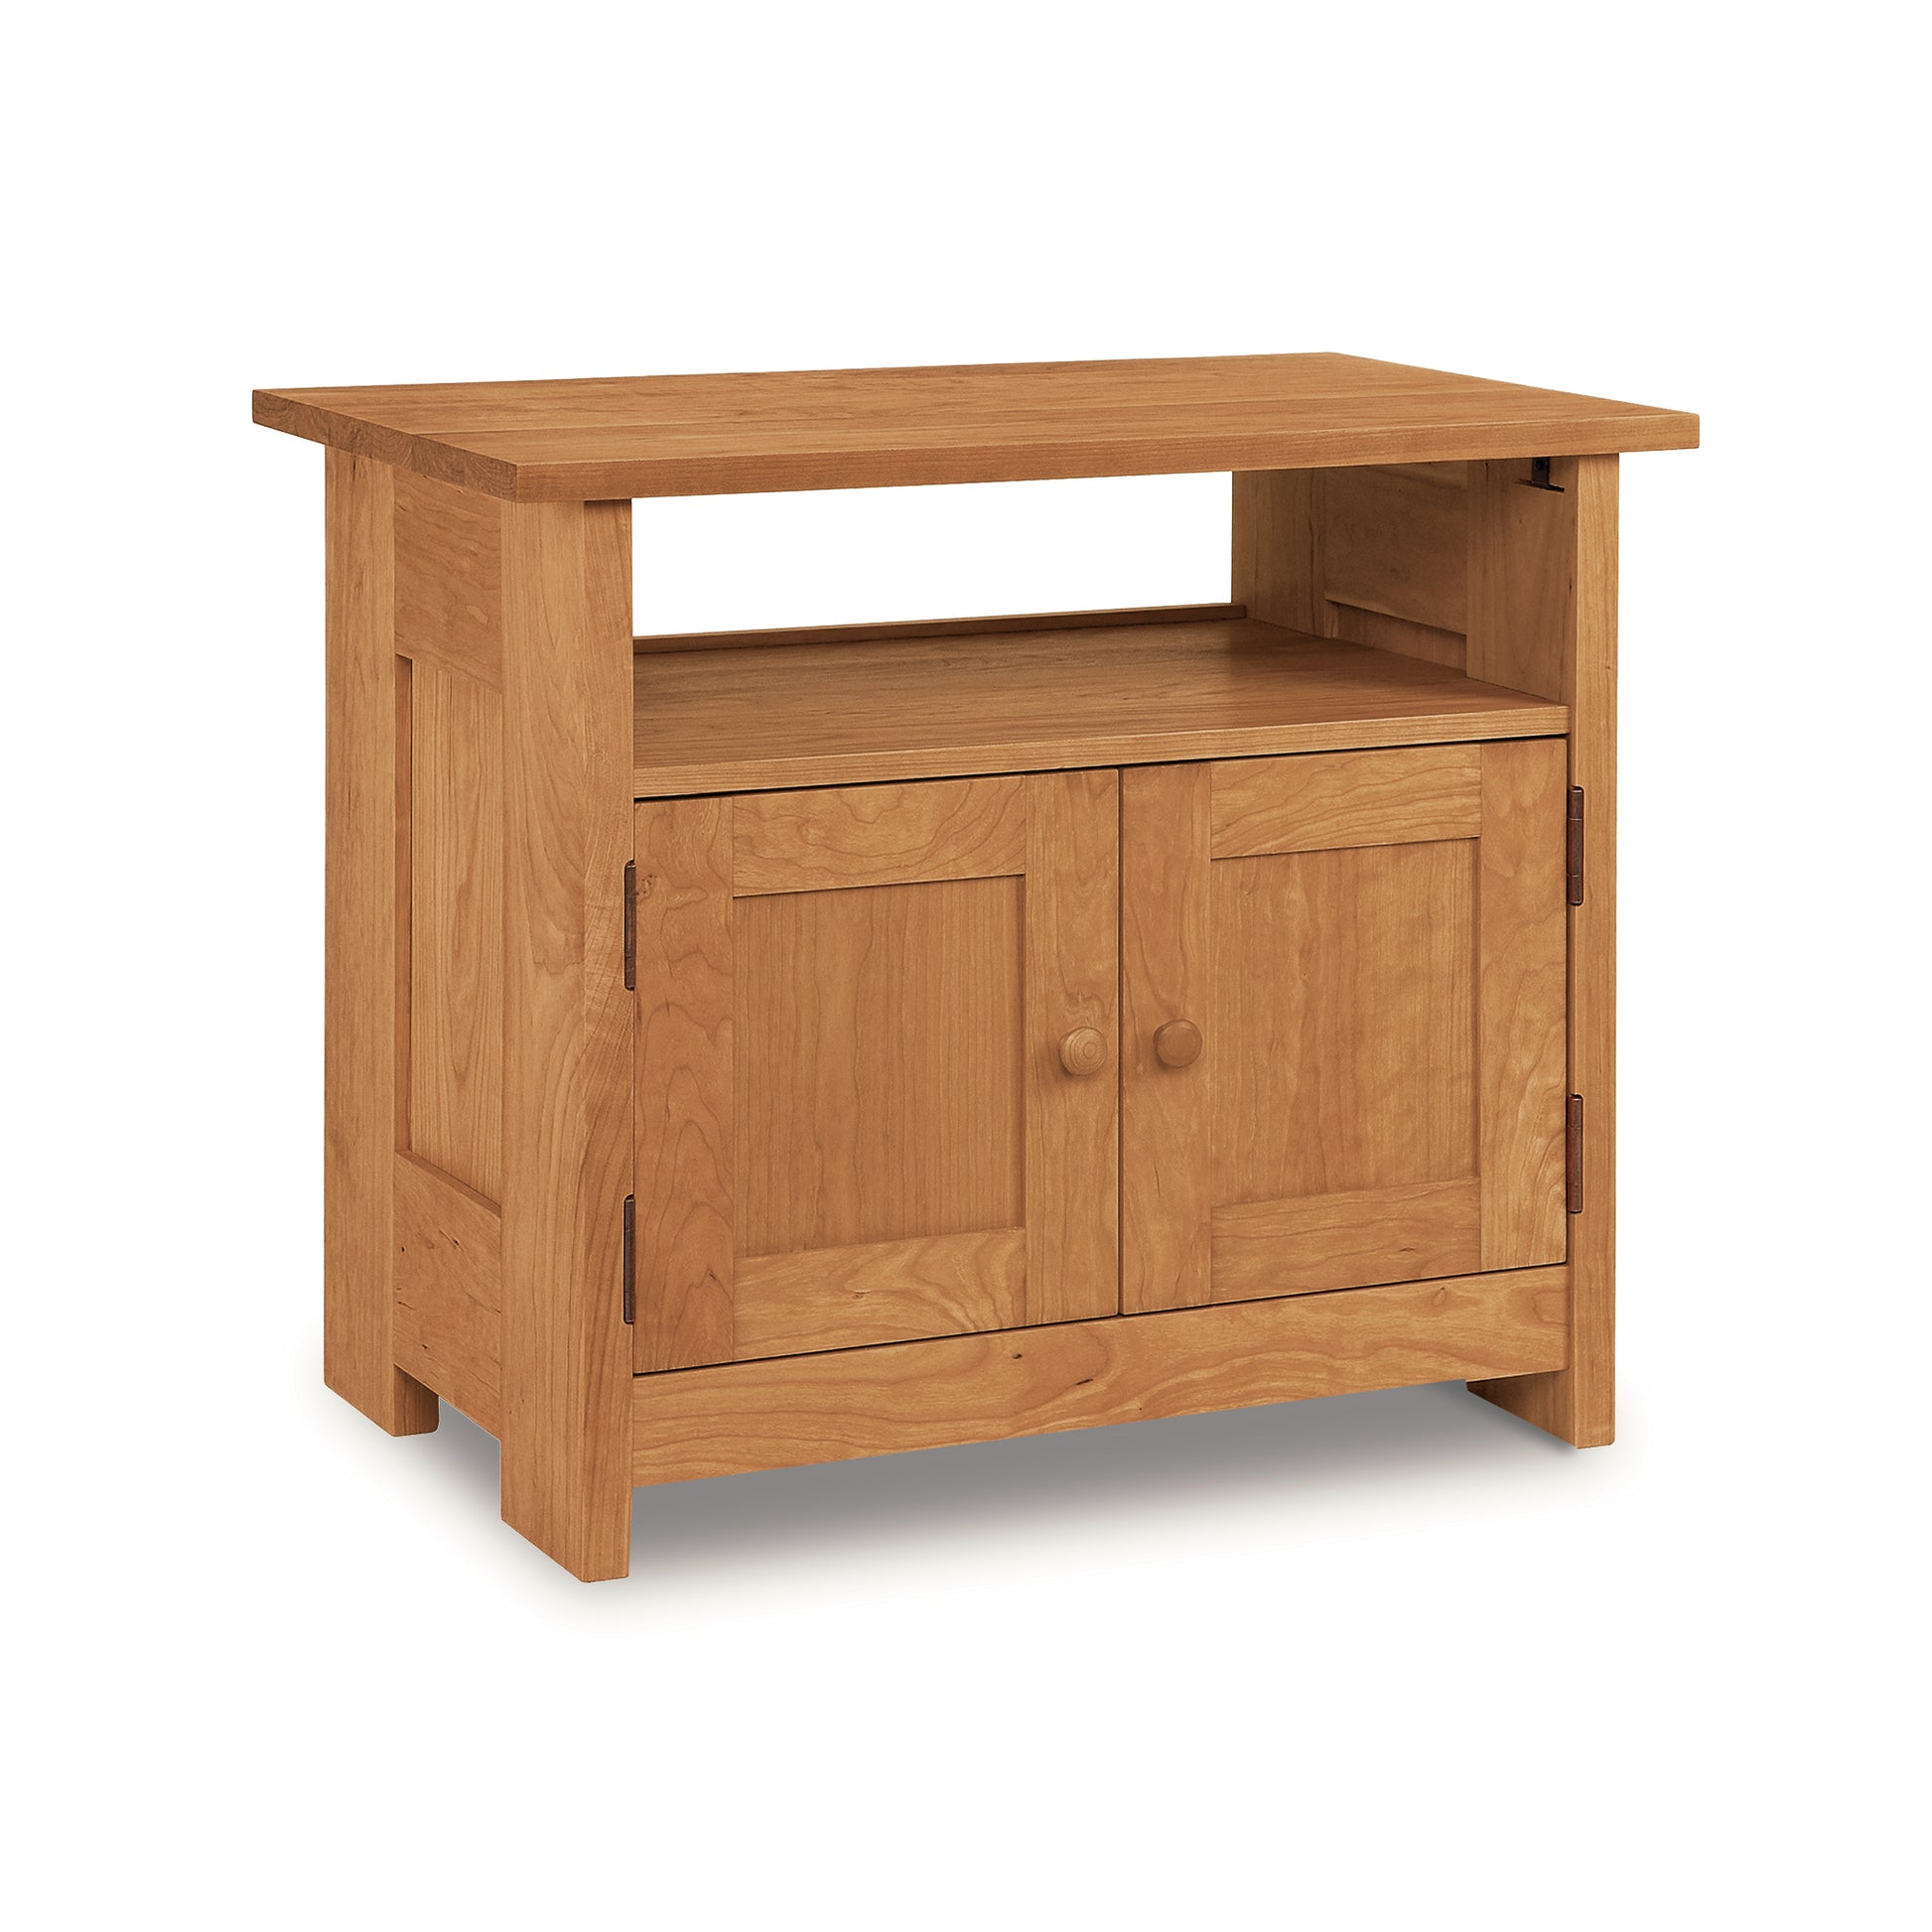 A high-end wooden Vermont Furniture Designs Homestead Small TV Stand, handcrafted with solid wood and featuring two doors.